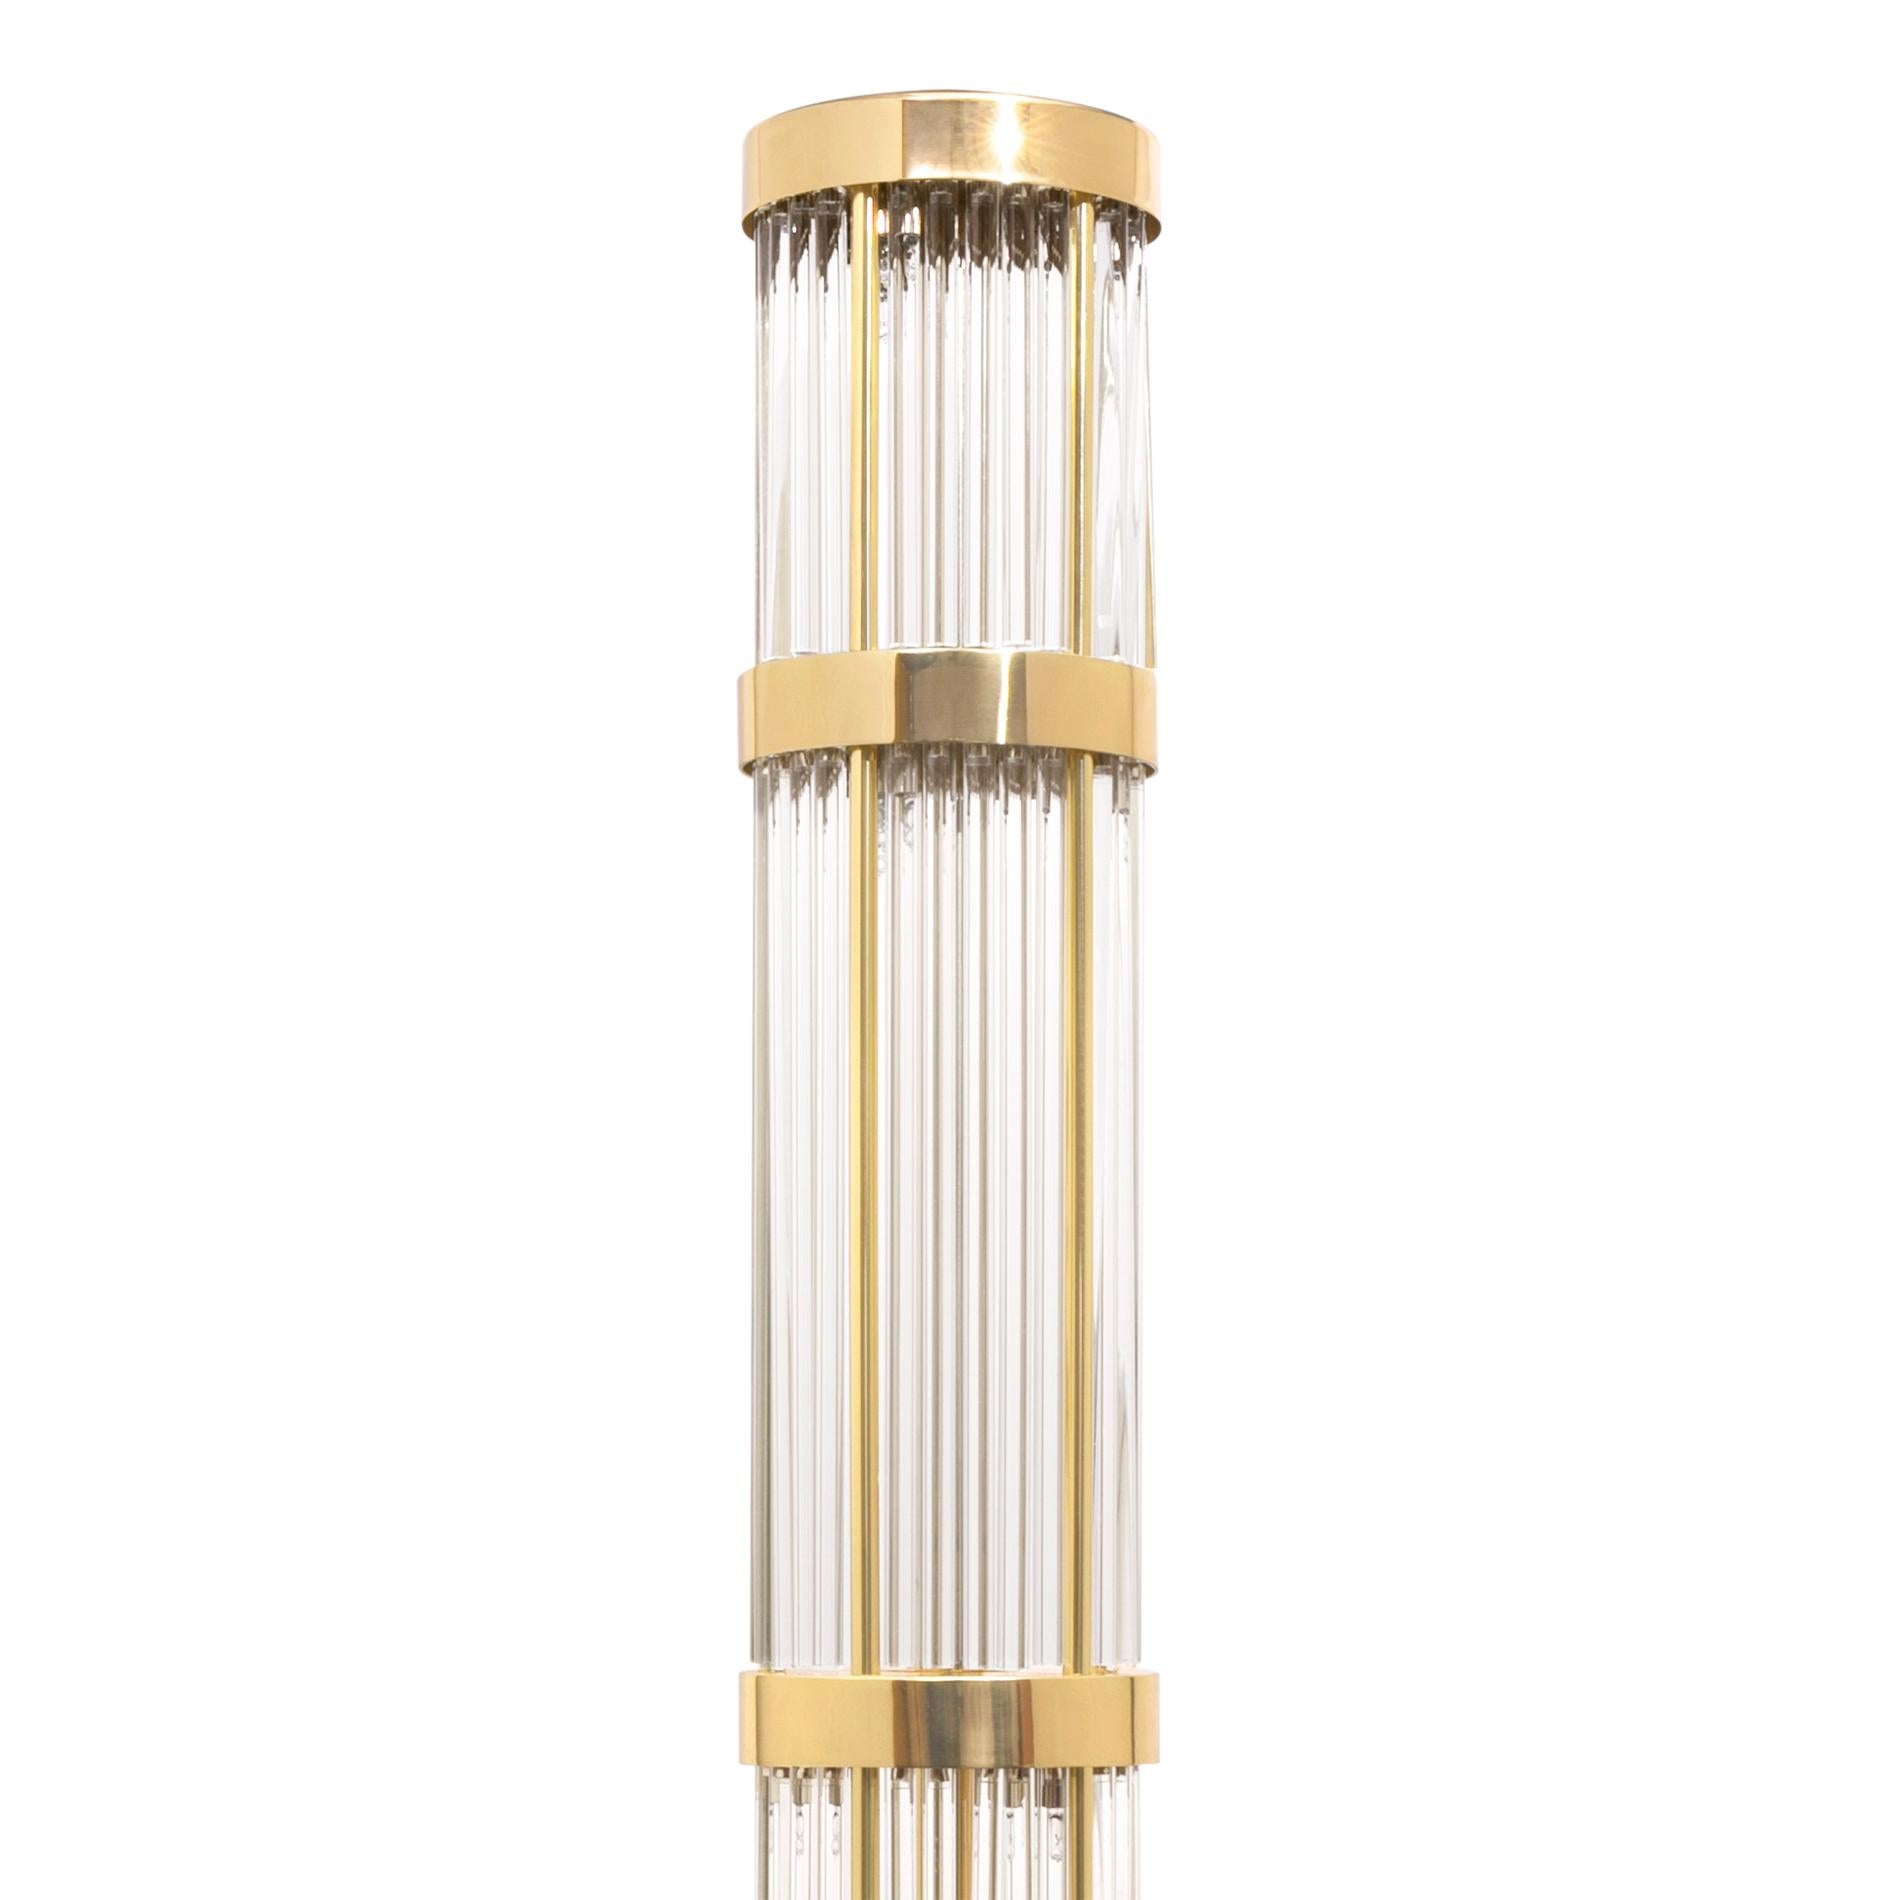 Floor lamp highlight brass with solid polished
brass structure and with crystal glass sticks. Base
made with Carrara marble and solid polished brass.
12 bulbs, lamp holder type g9 halogen, max 40 watt,
voltage: 220-240V. Bulbs not included.